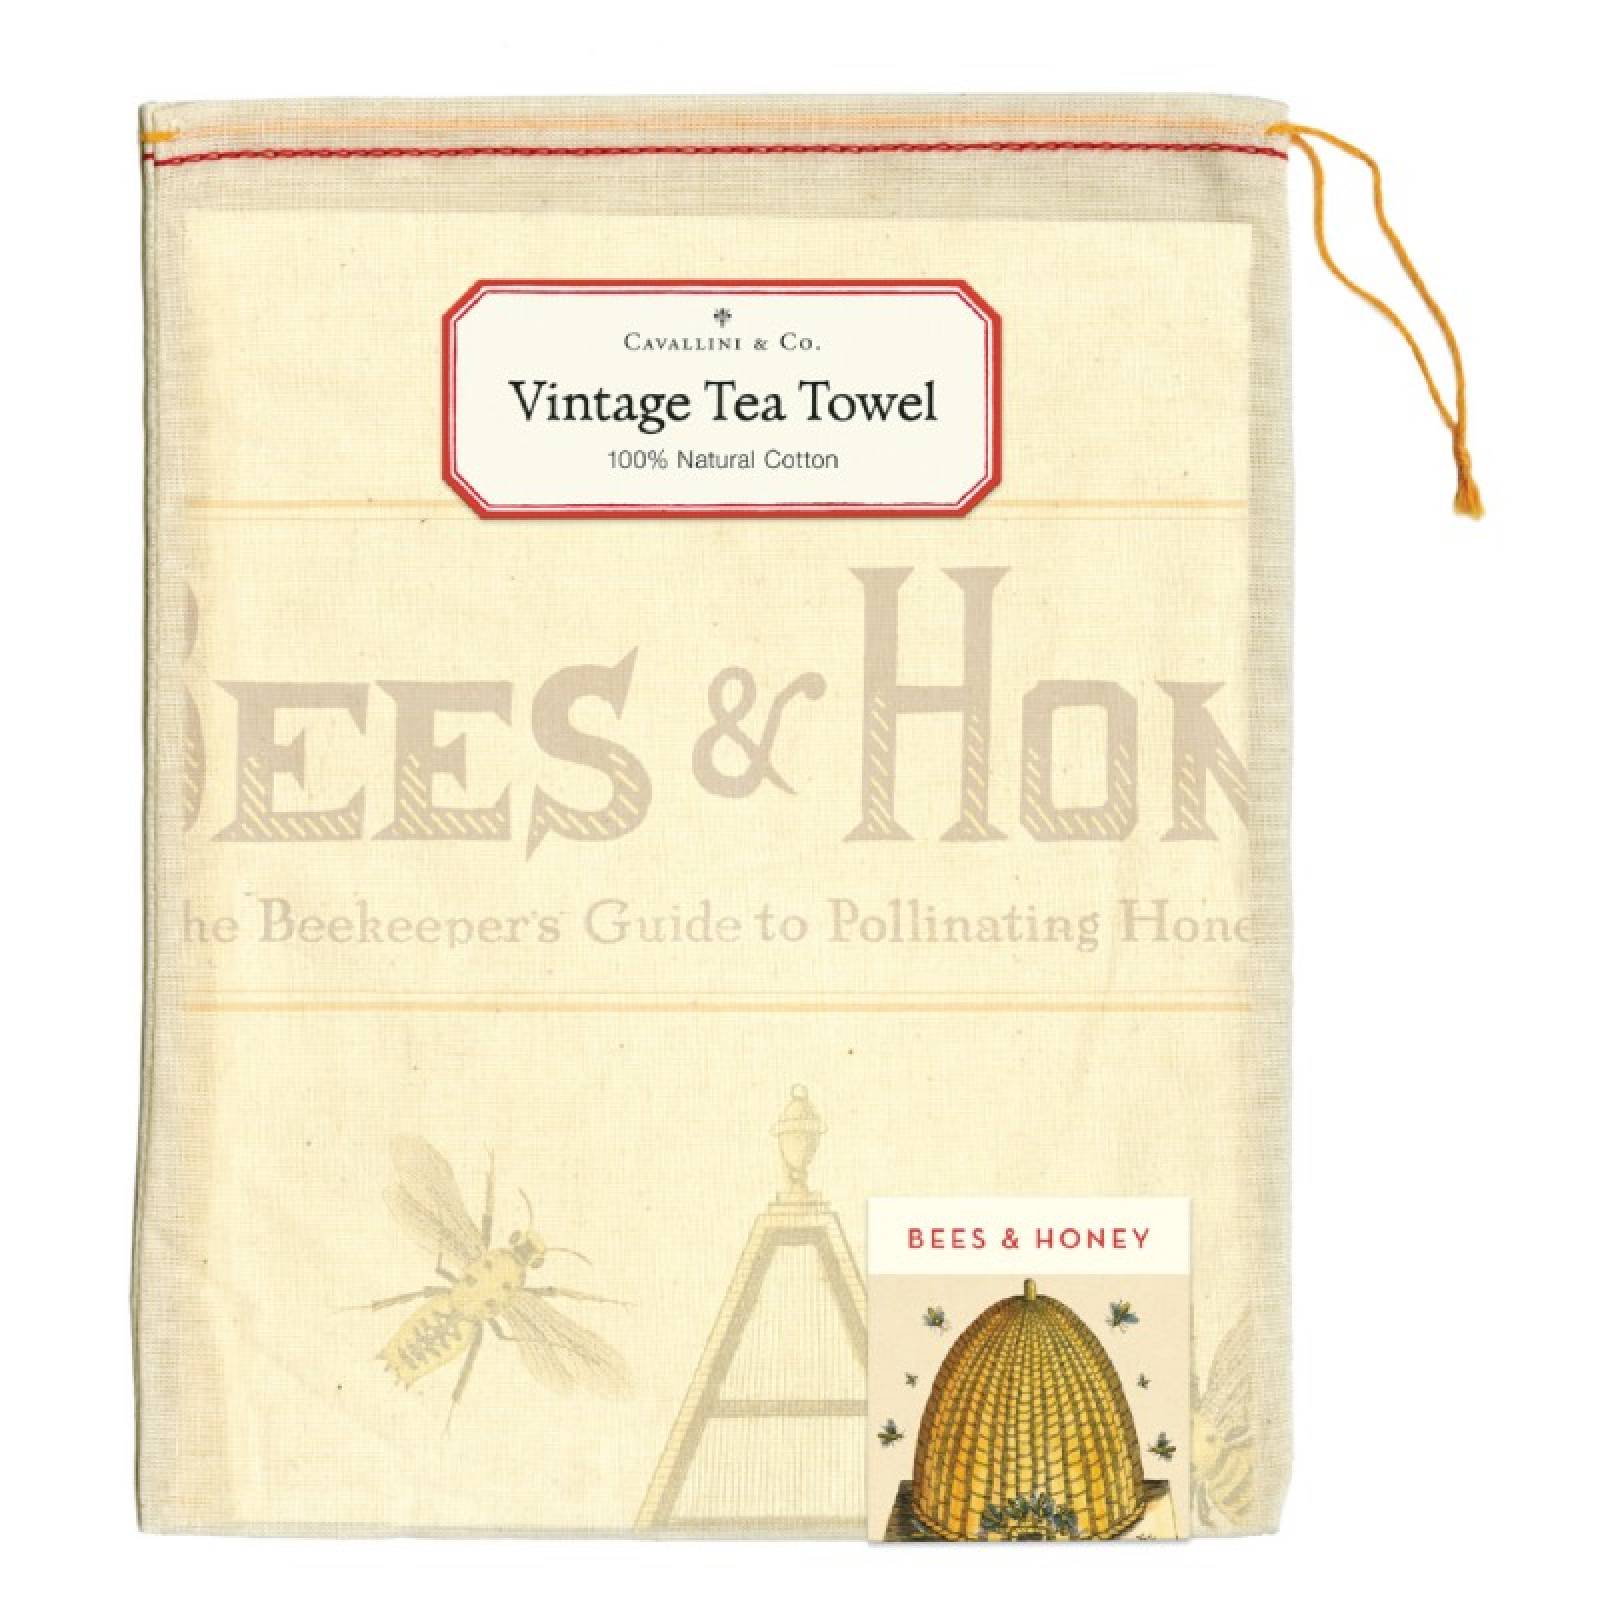 Bees & Honey Cotton Tea Towel With Gift Bag thumbnails